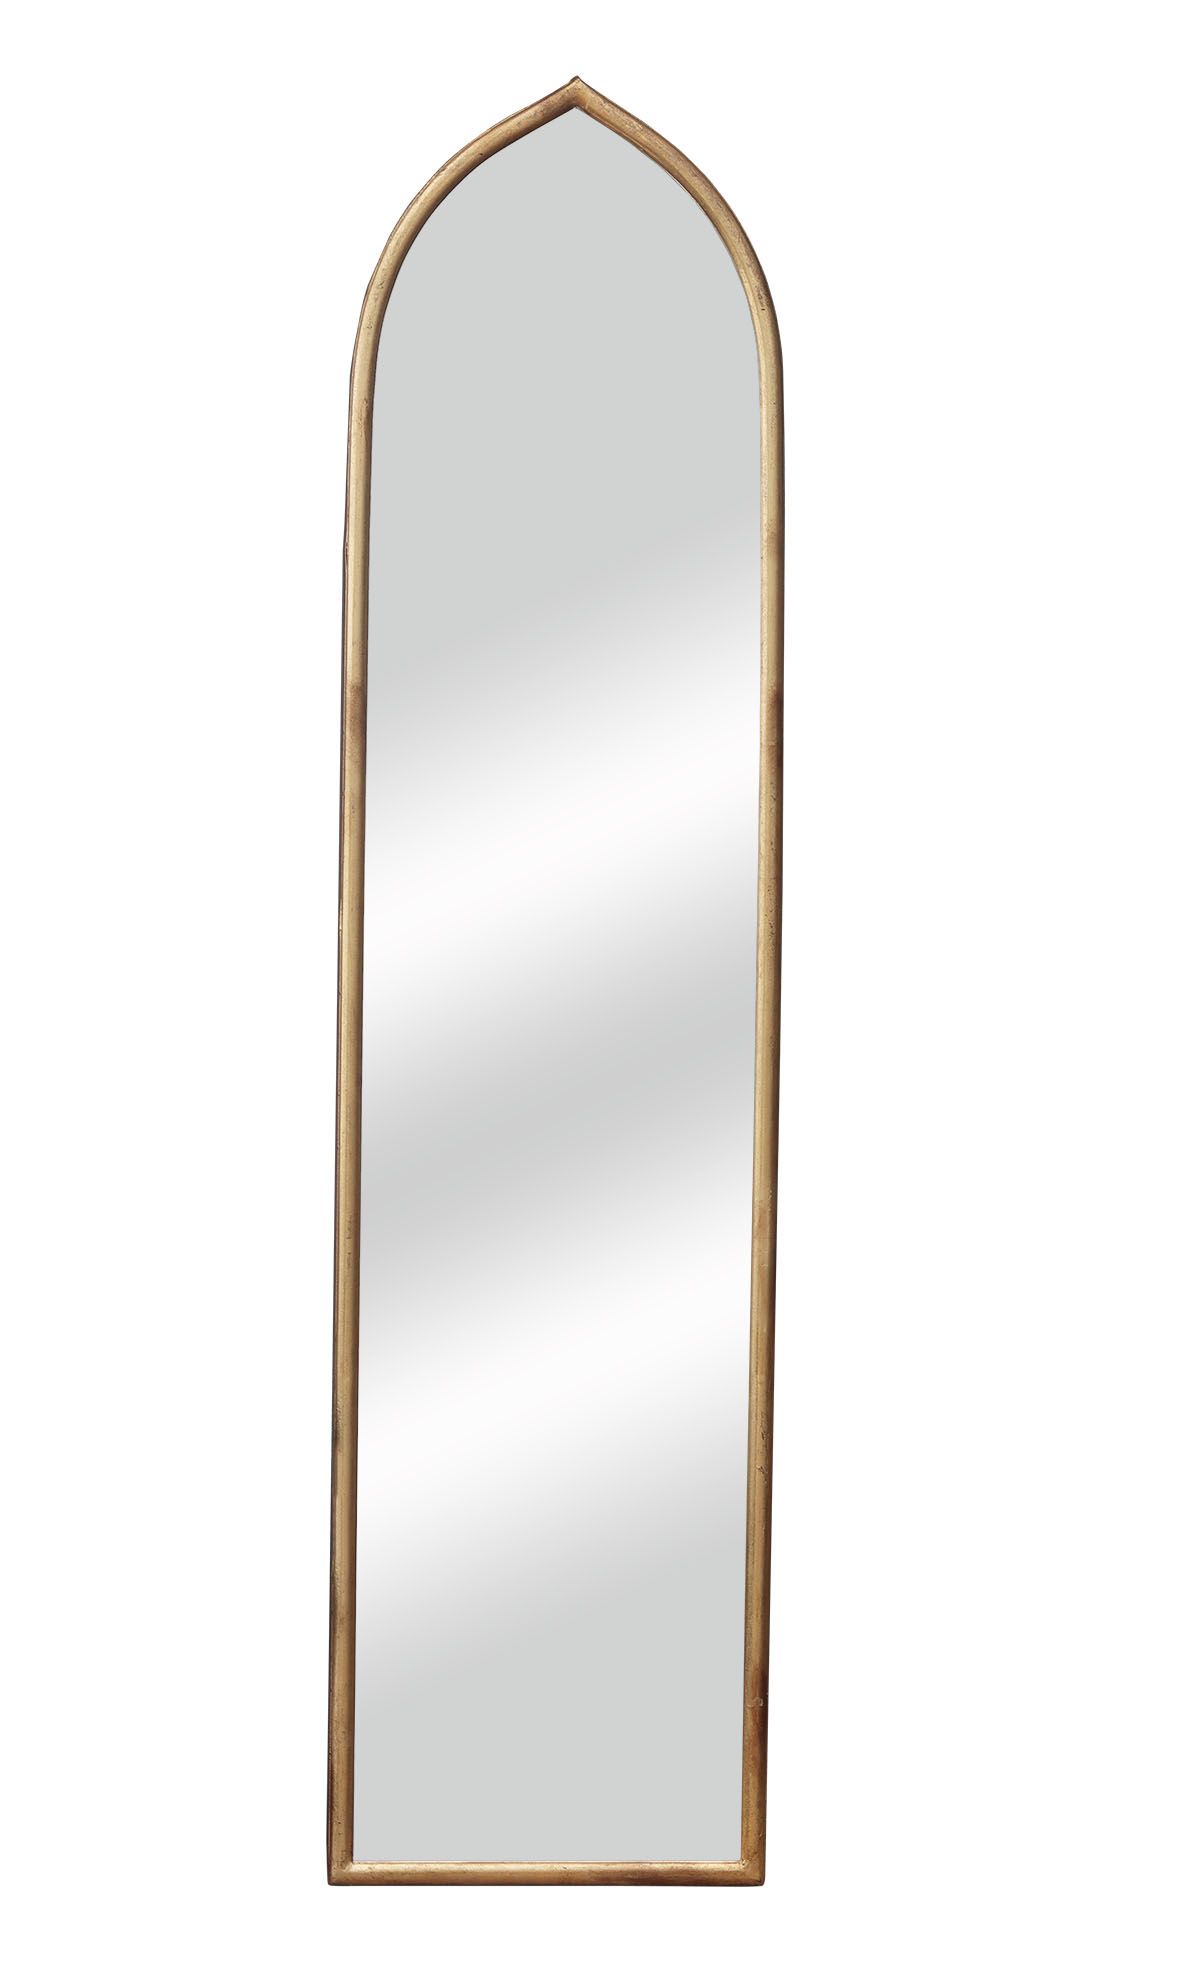 Vintage Full Length Wall Mirror With Arched Metal Frame, Simple Full Regarding Mirror Framed Bathroom Wall Mirrors (View 10 of 15)